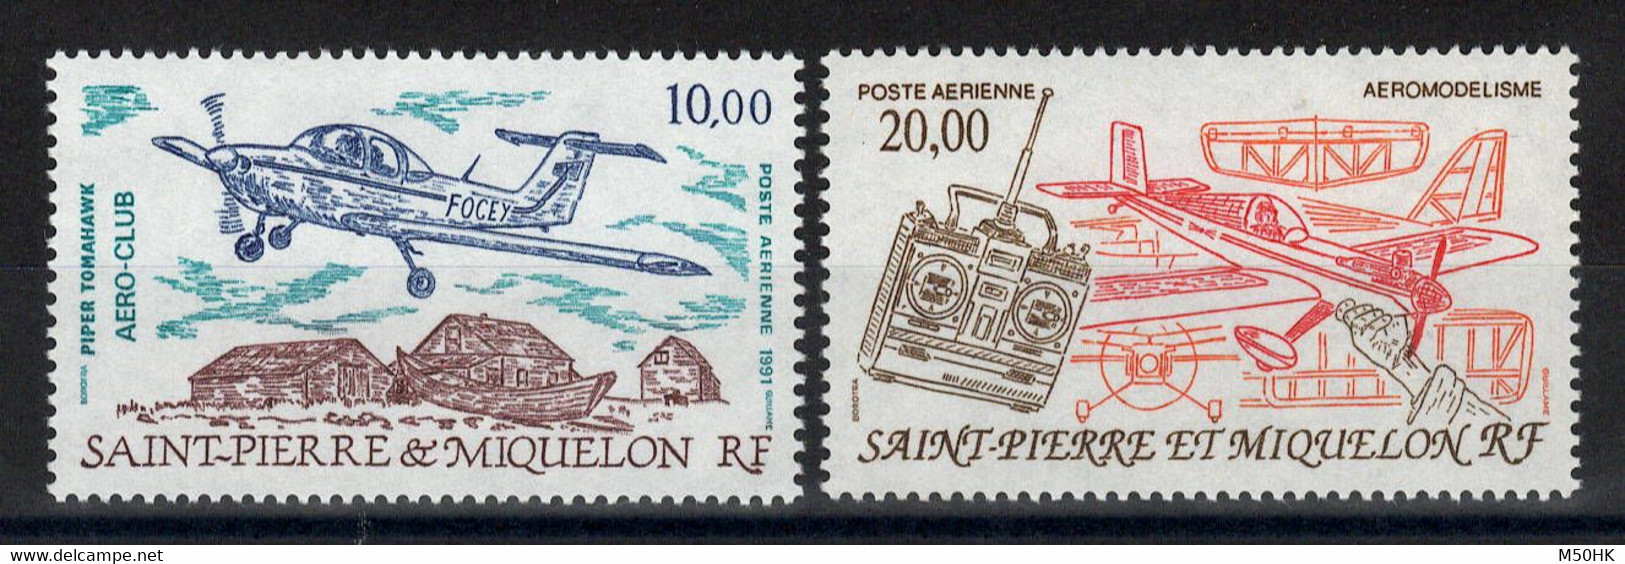 SPM - YV PA 70 & 71 N** MNH Luxe , Cote 13,60 Euros - Unused Stamps